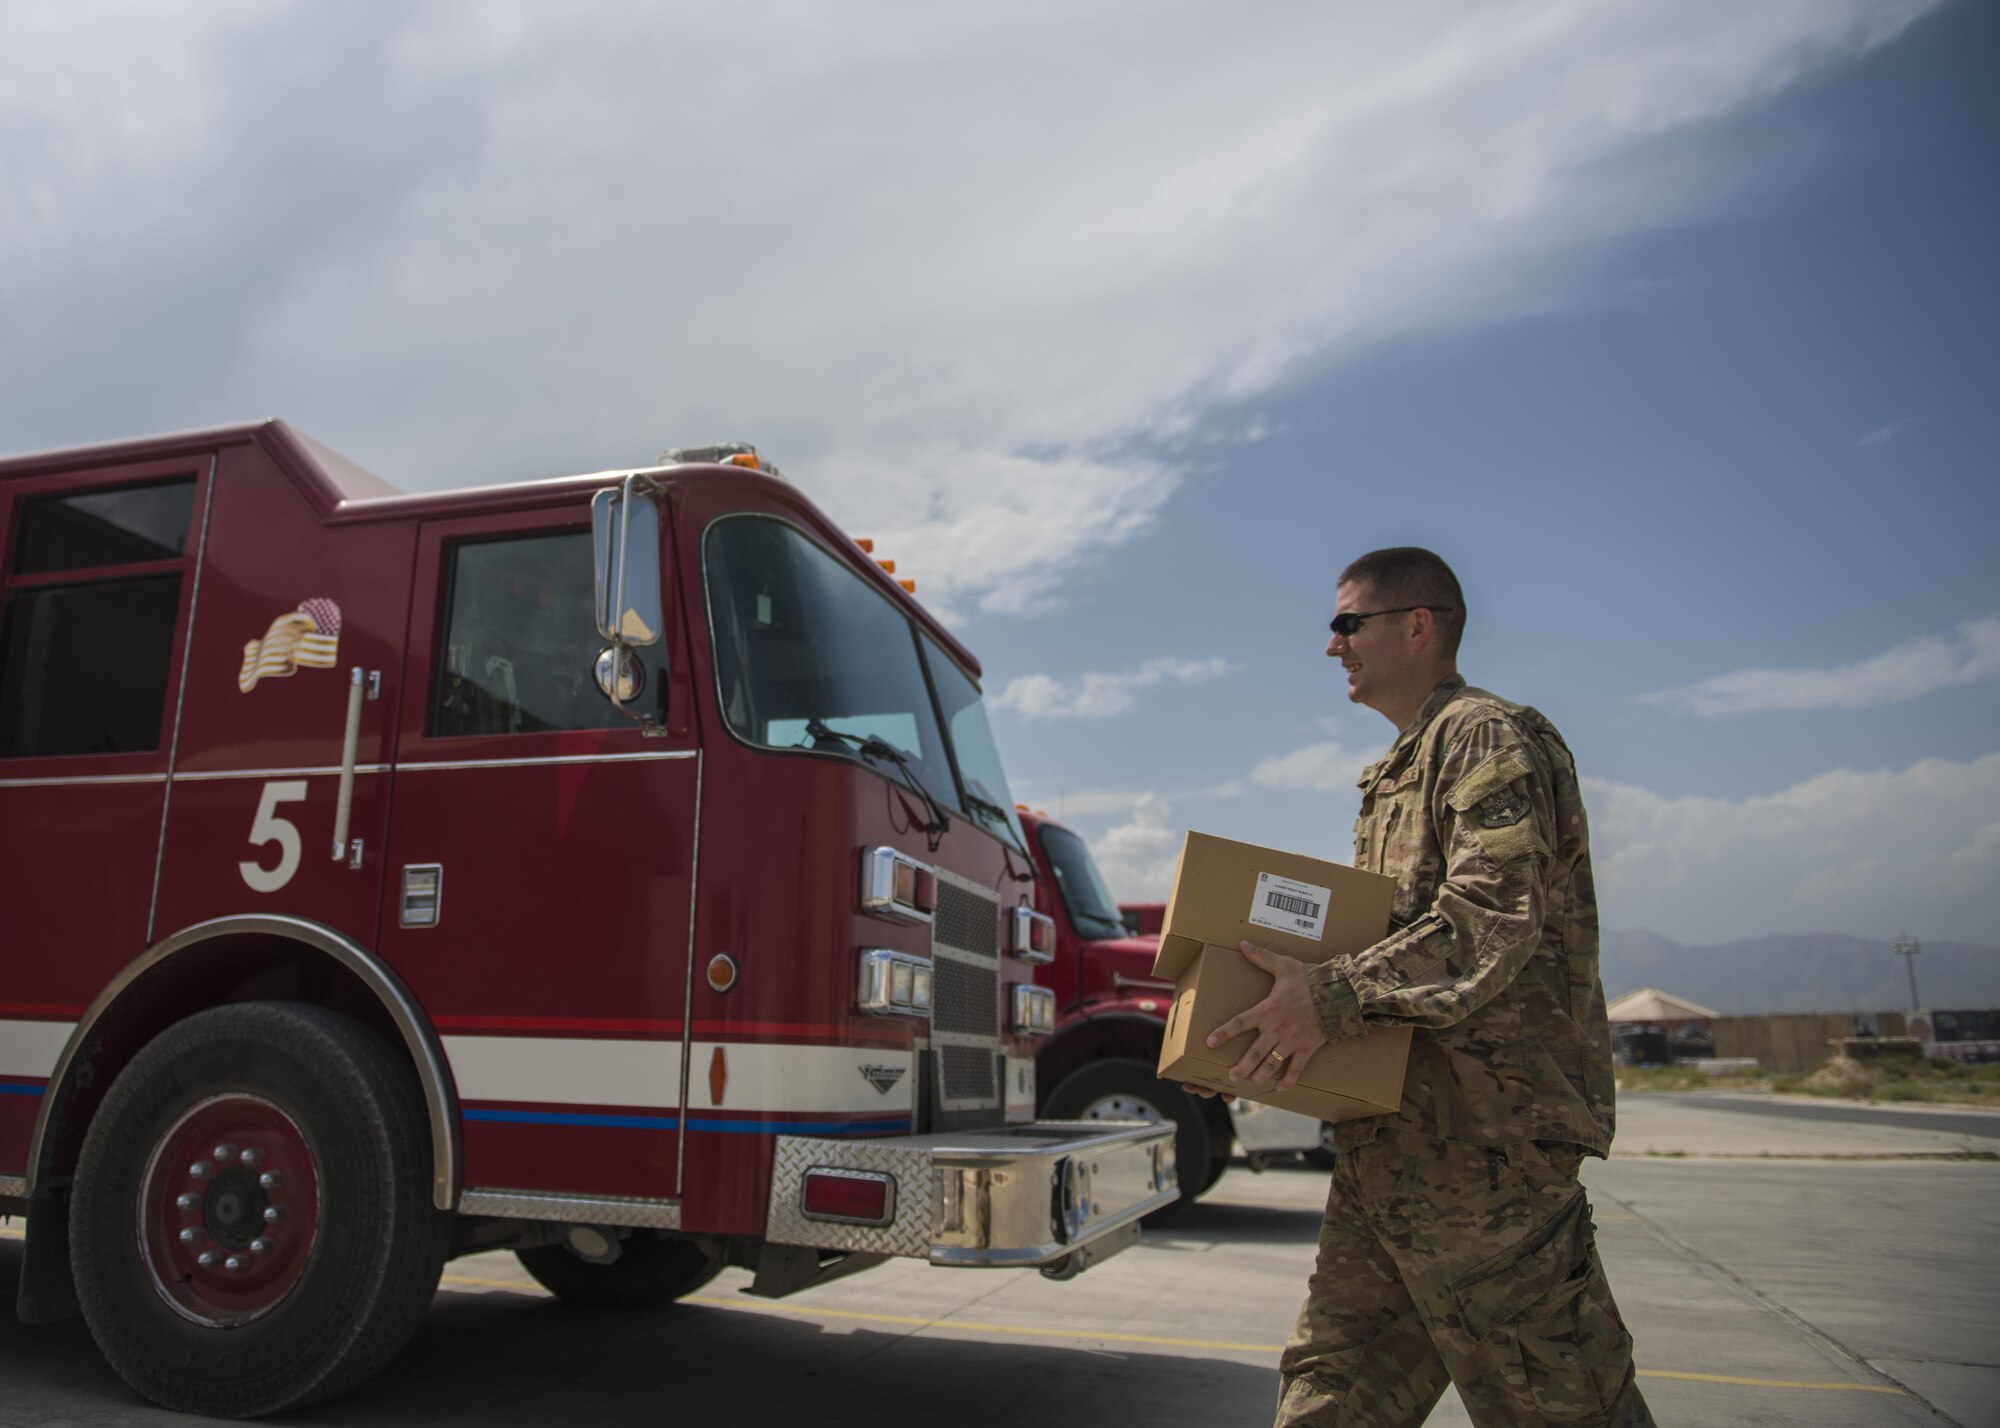 Capt. Jonathan Ayers, 455th Air Expeditionary Wing chaplain, carries boxes of coffee to deliver to the Fire Department, Bagram Airfield, Afghanistan, Aug. 4, 2016. The chaplain team supports 10 units on the east side of the base. Delivering coffee is a way to boost morale and get a chance to engage with unit members. (U.S. Air Force photo by Senior Airman Justyn M. Freeman)